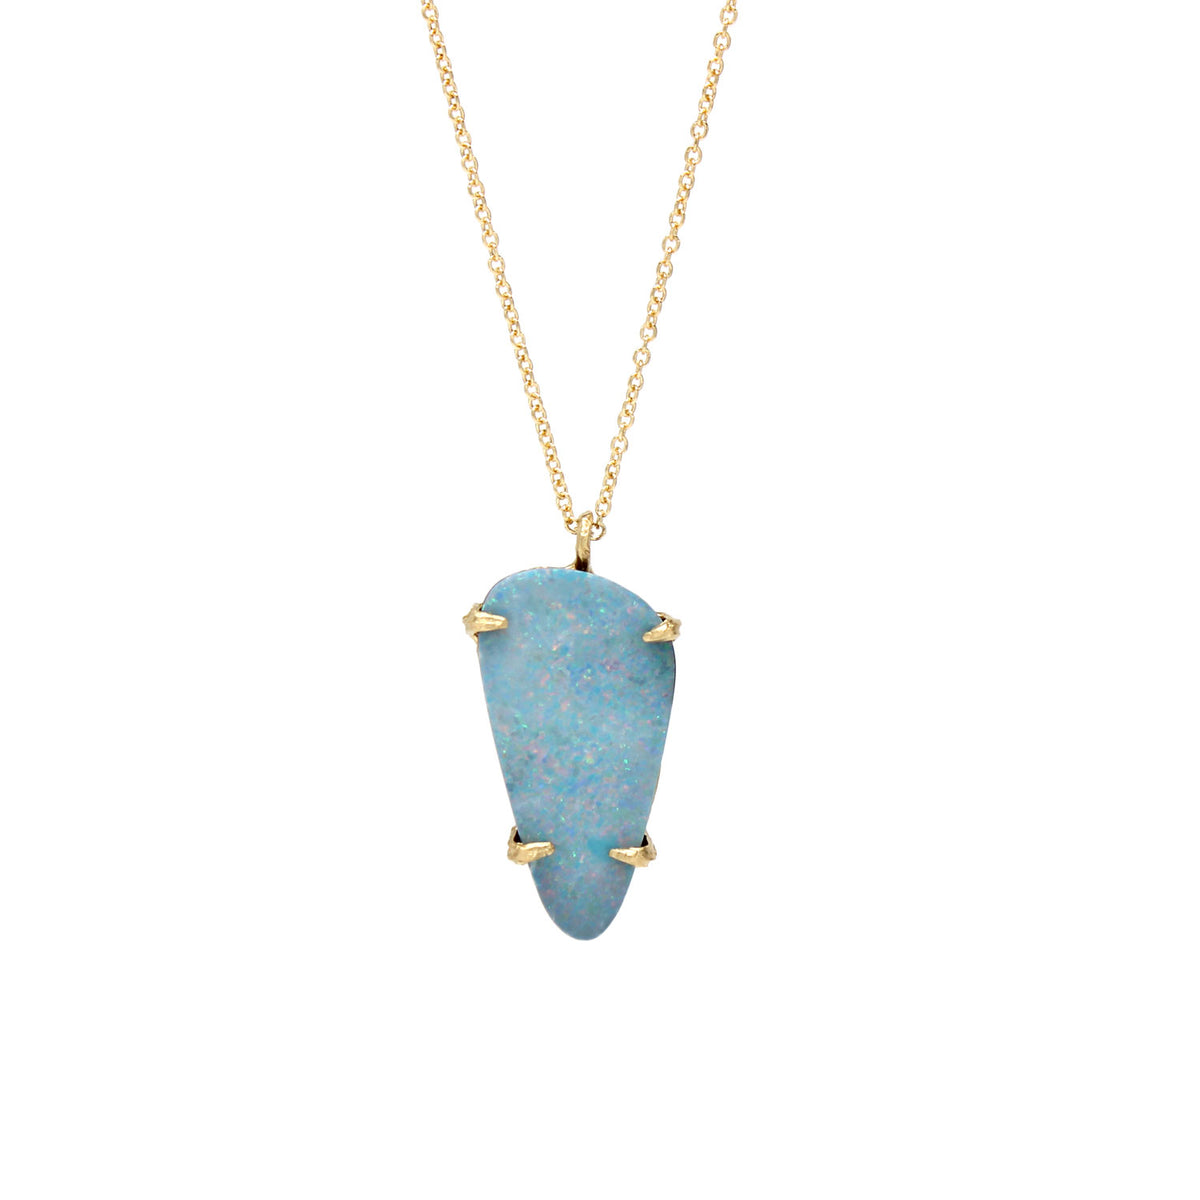 One-of-a-Kind Opal Doublet Necklace